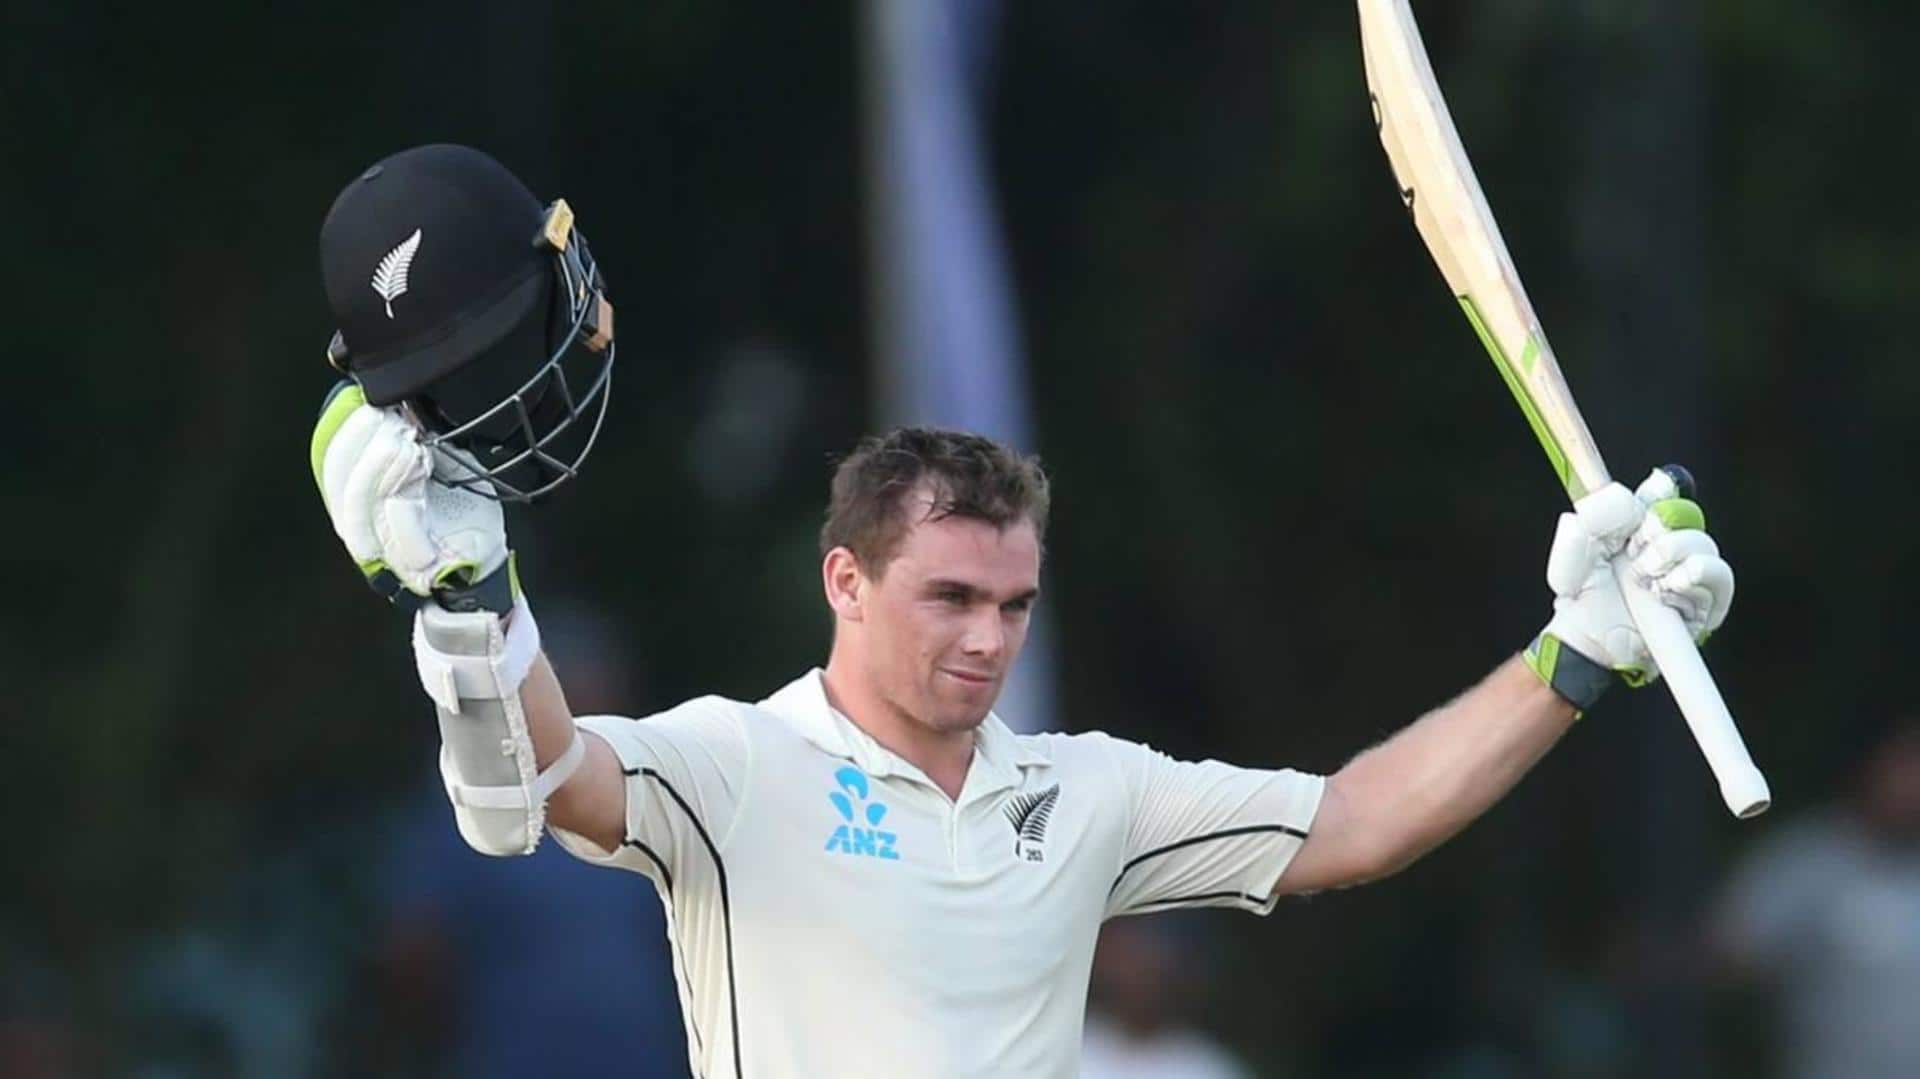 Tom Latham set to complete 5,000 runs in Test cricket